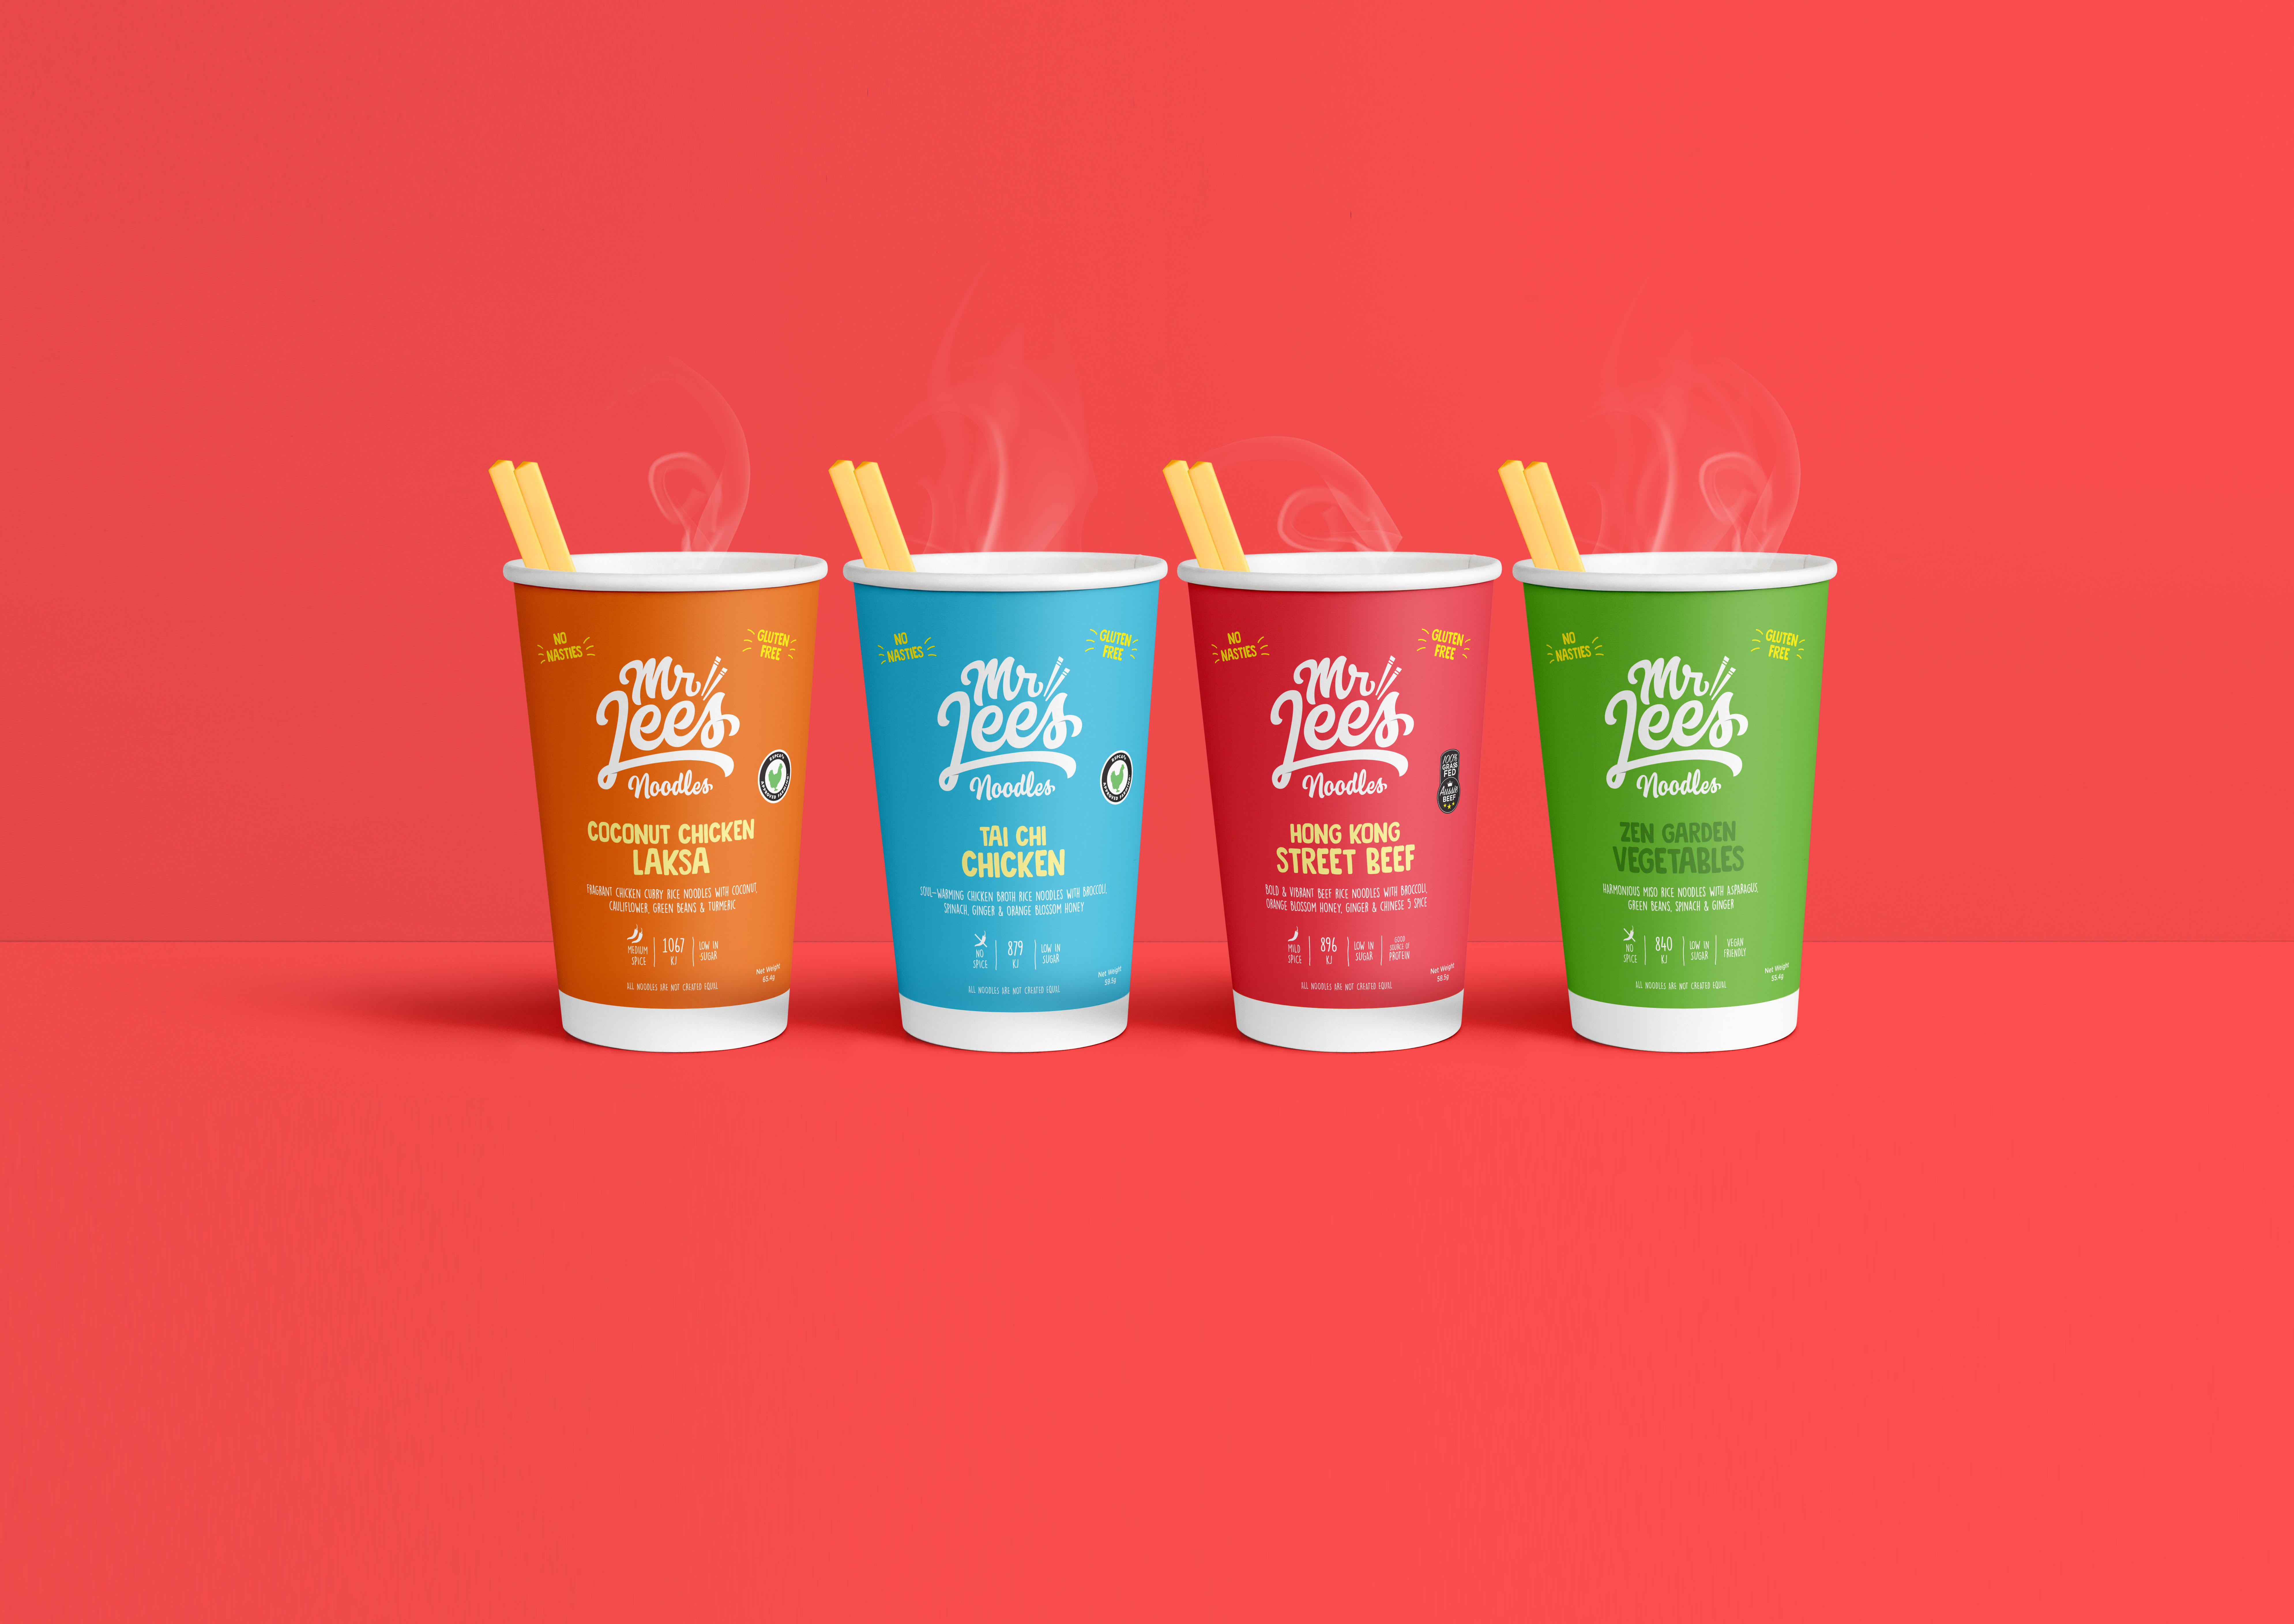 Noodle challenge: Mr Lee's Noodles overcomes packaging and pricing concerns  for Asian expansion